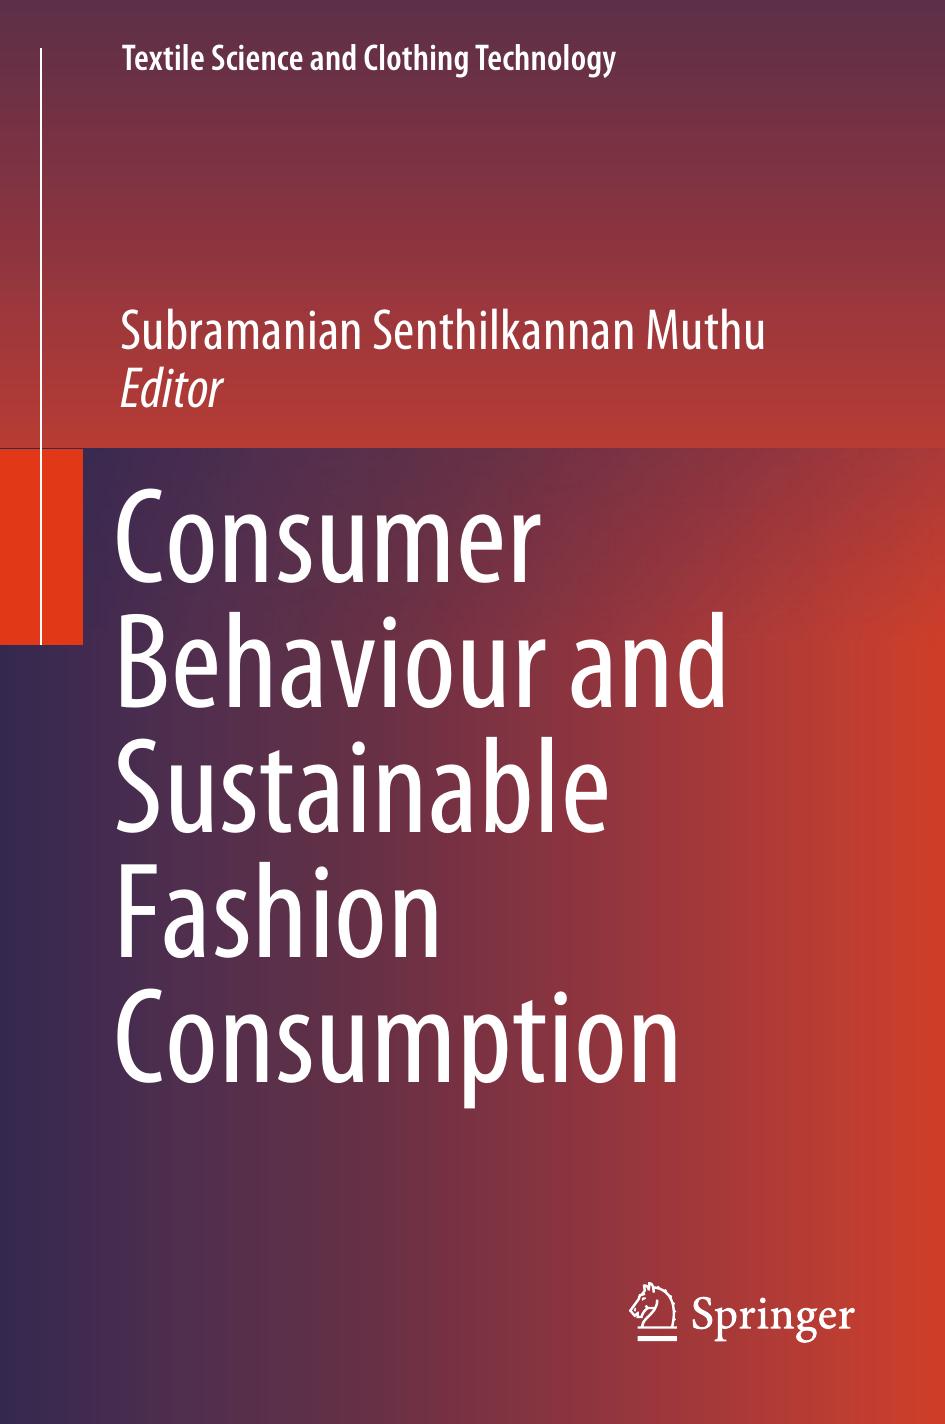 Consumer Behaviour and Sustainable Fashion Consumption by Subramanian Senthilkannan Muthu